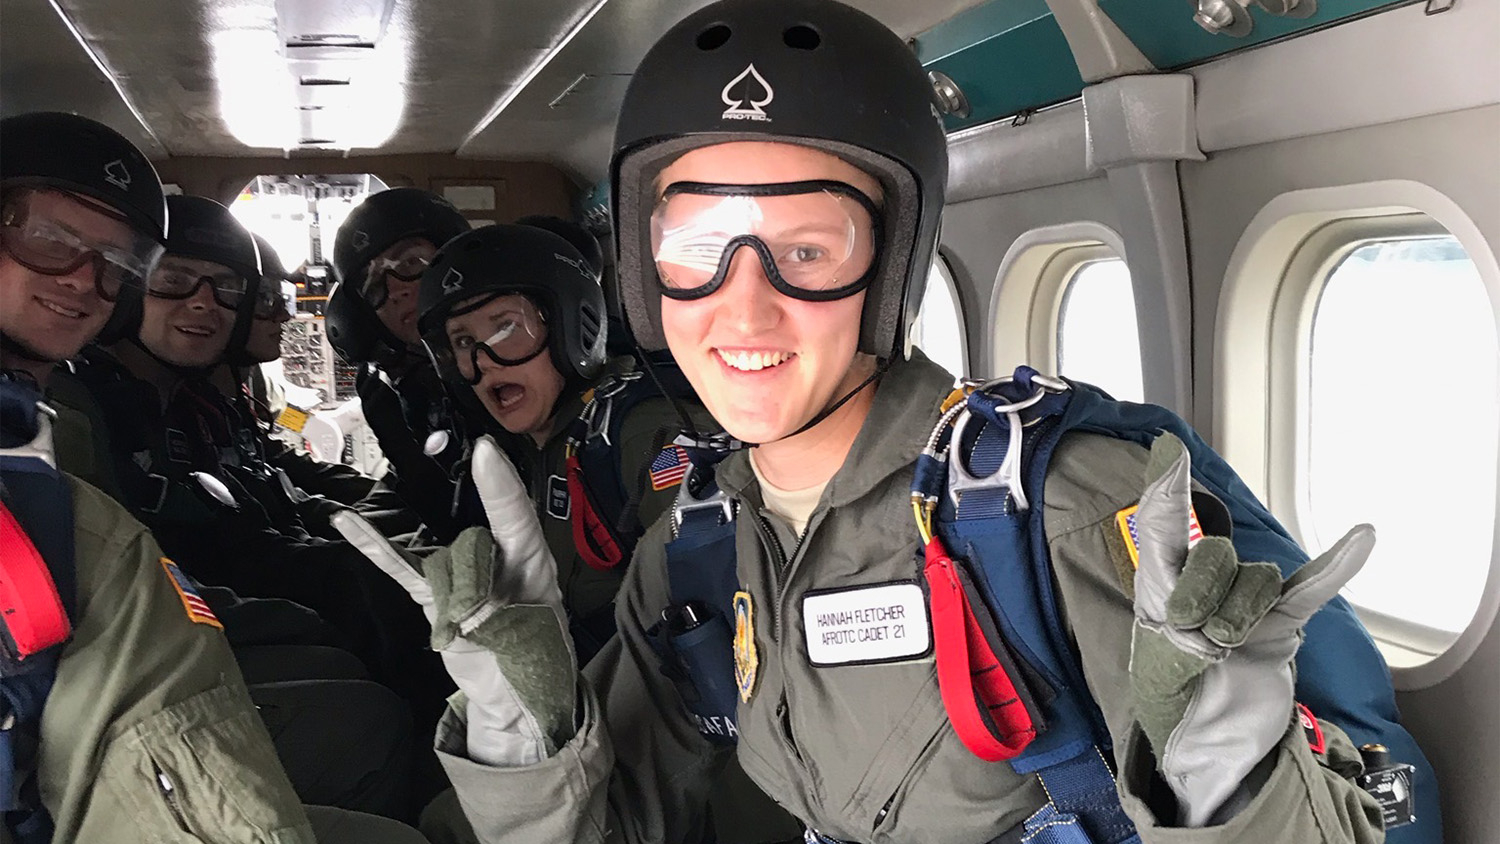 Hannah Fletcher dressed in paratrooper gear in the back of a plane holds up her hands in wolfie signs